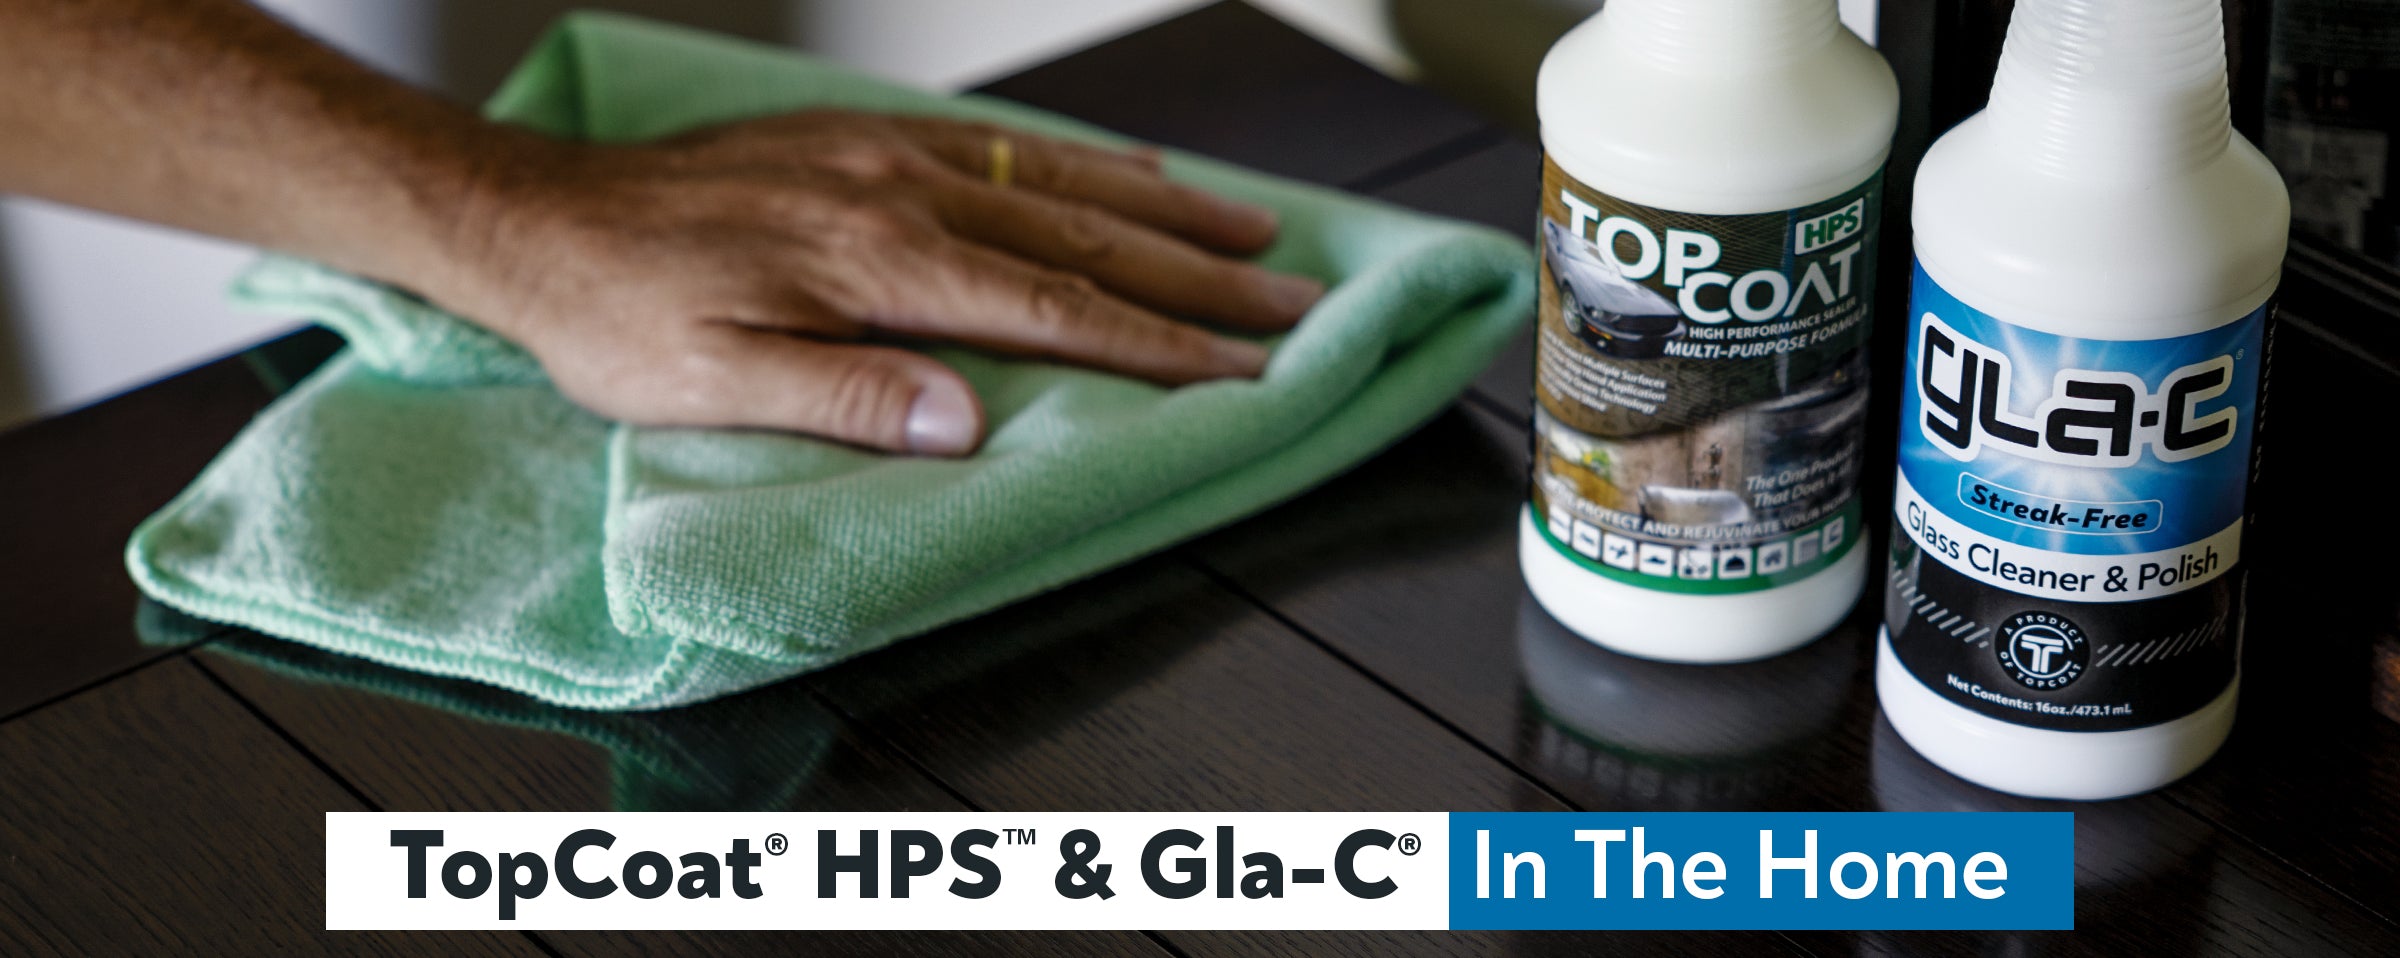 How To Protect and Maintain Your Home Using TopCoat® HPS® and Gla-C®